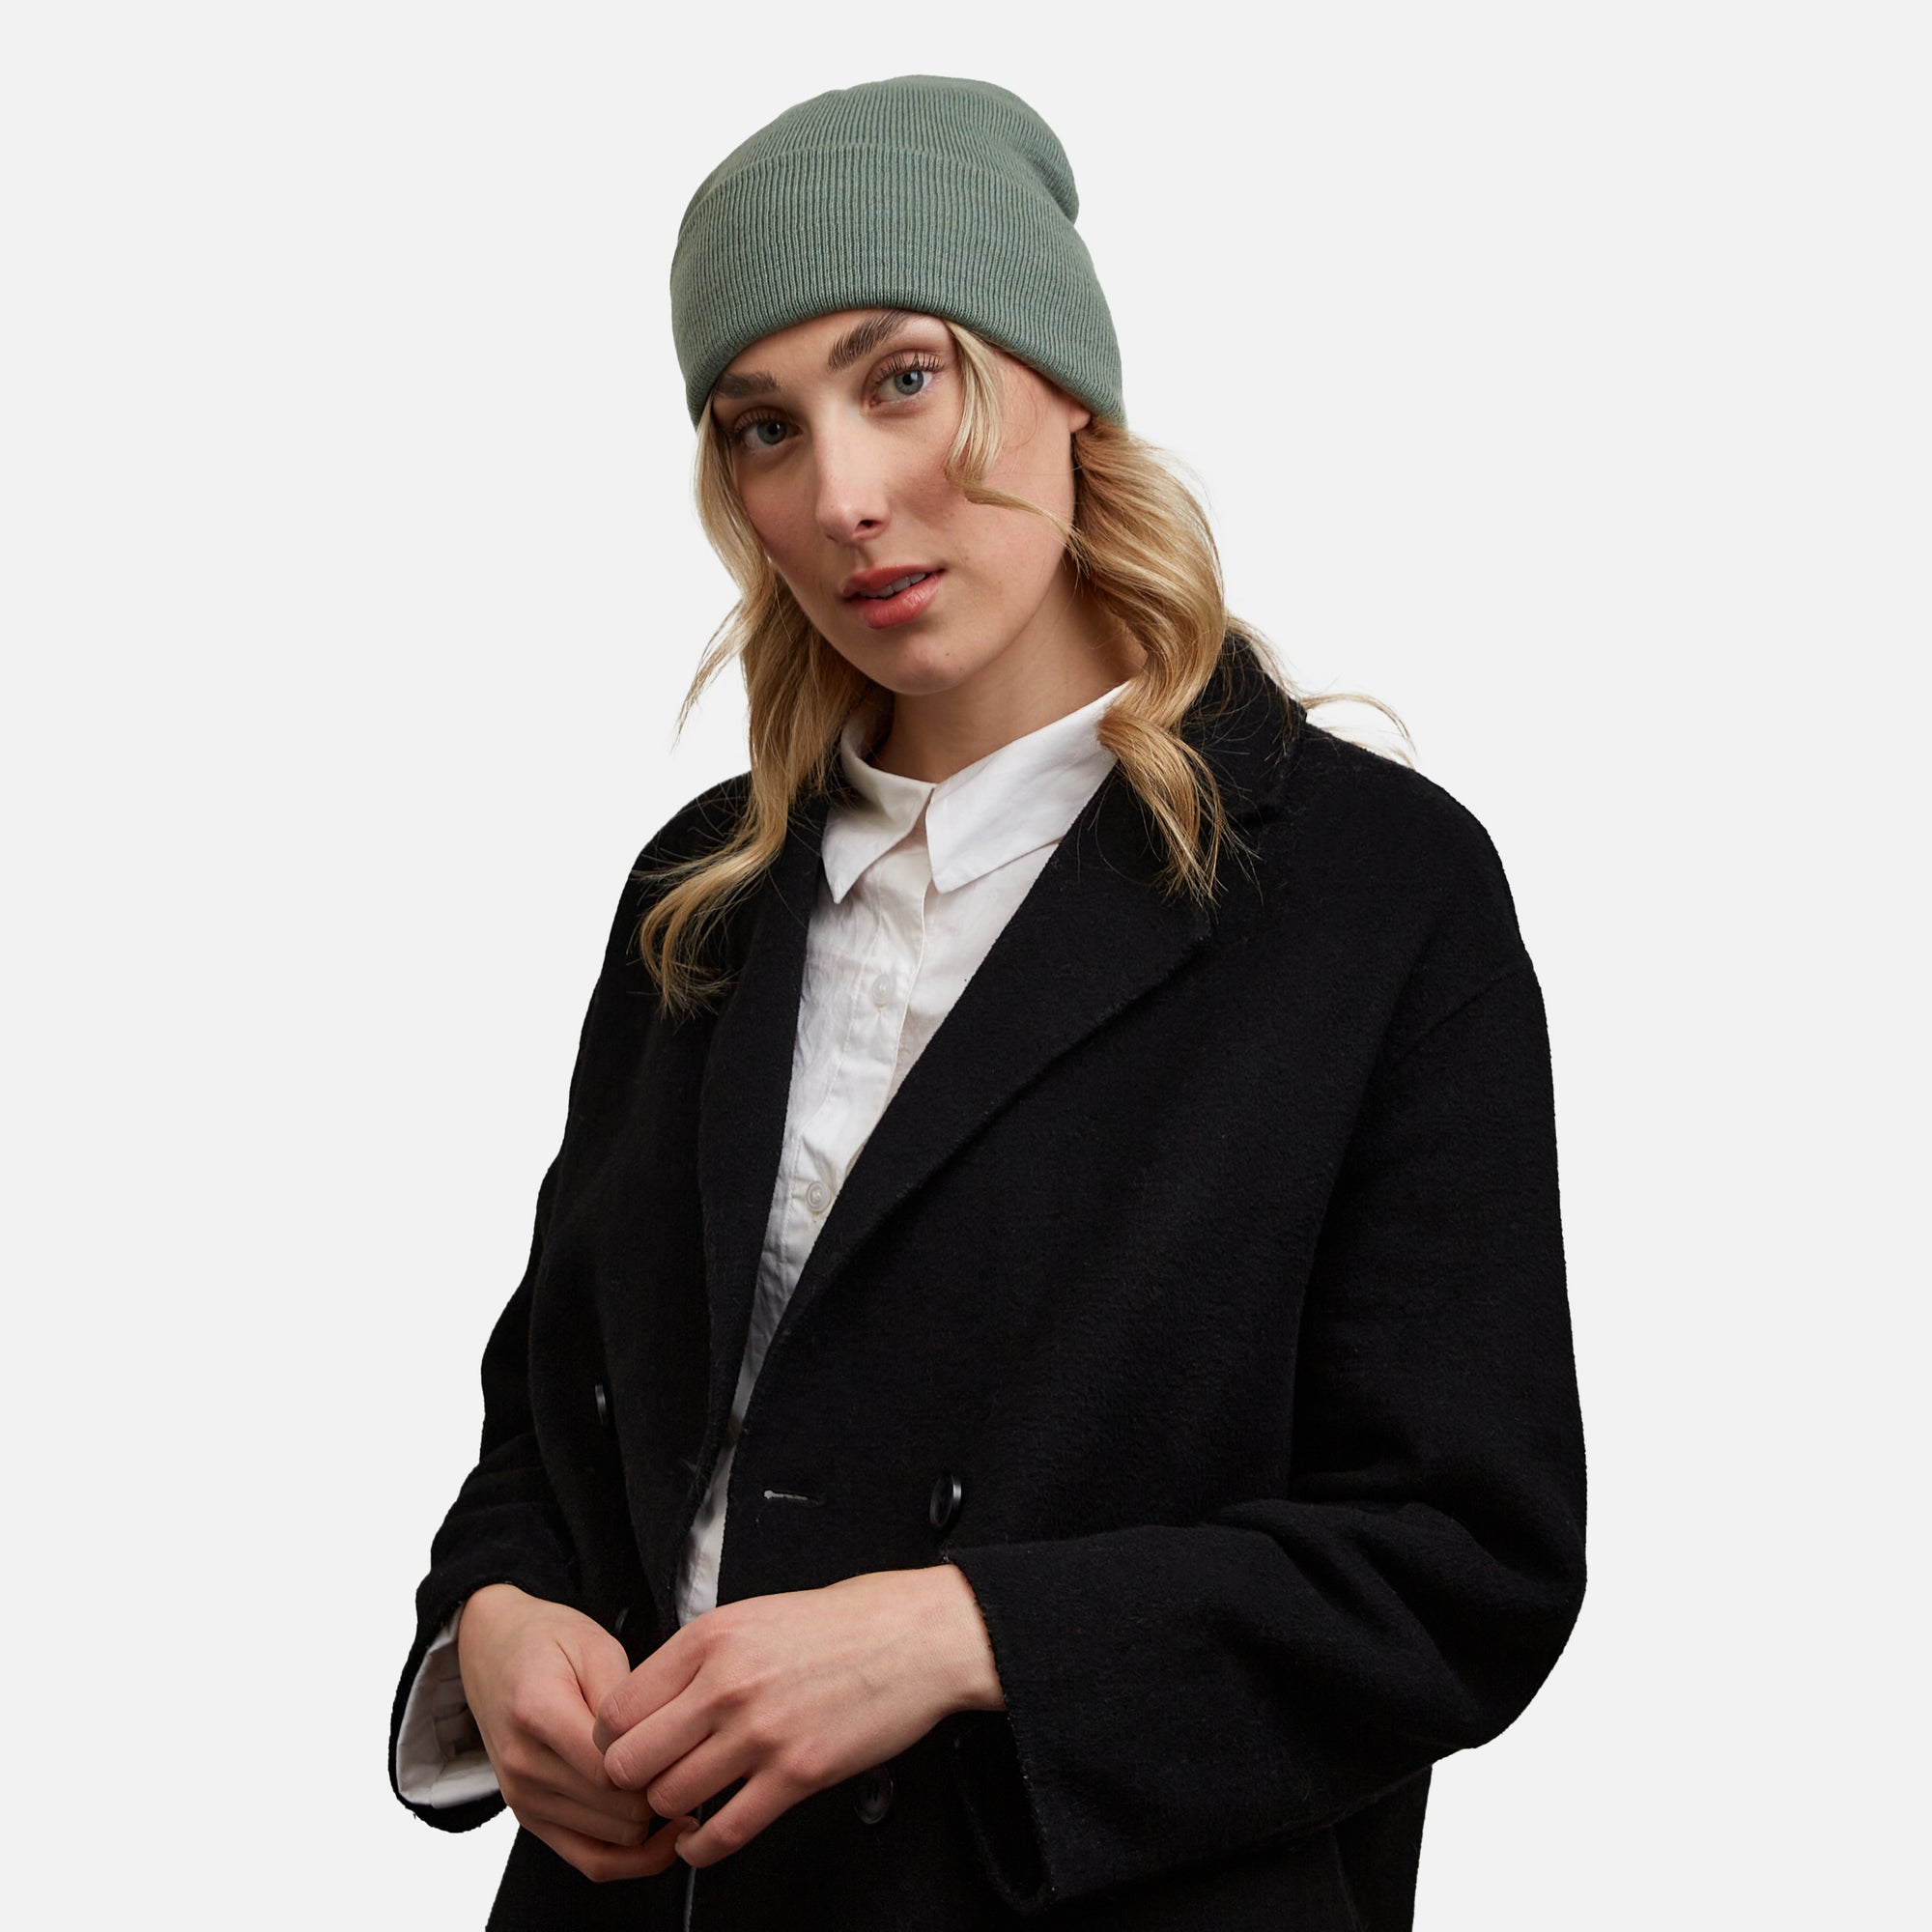 Pale green beanie with flap